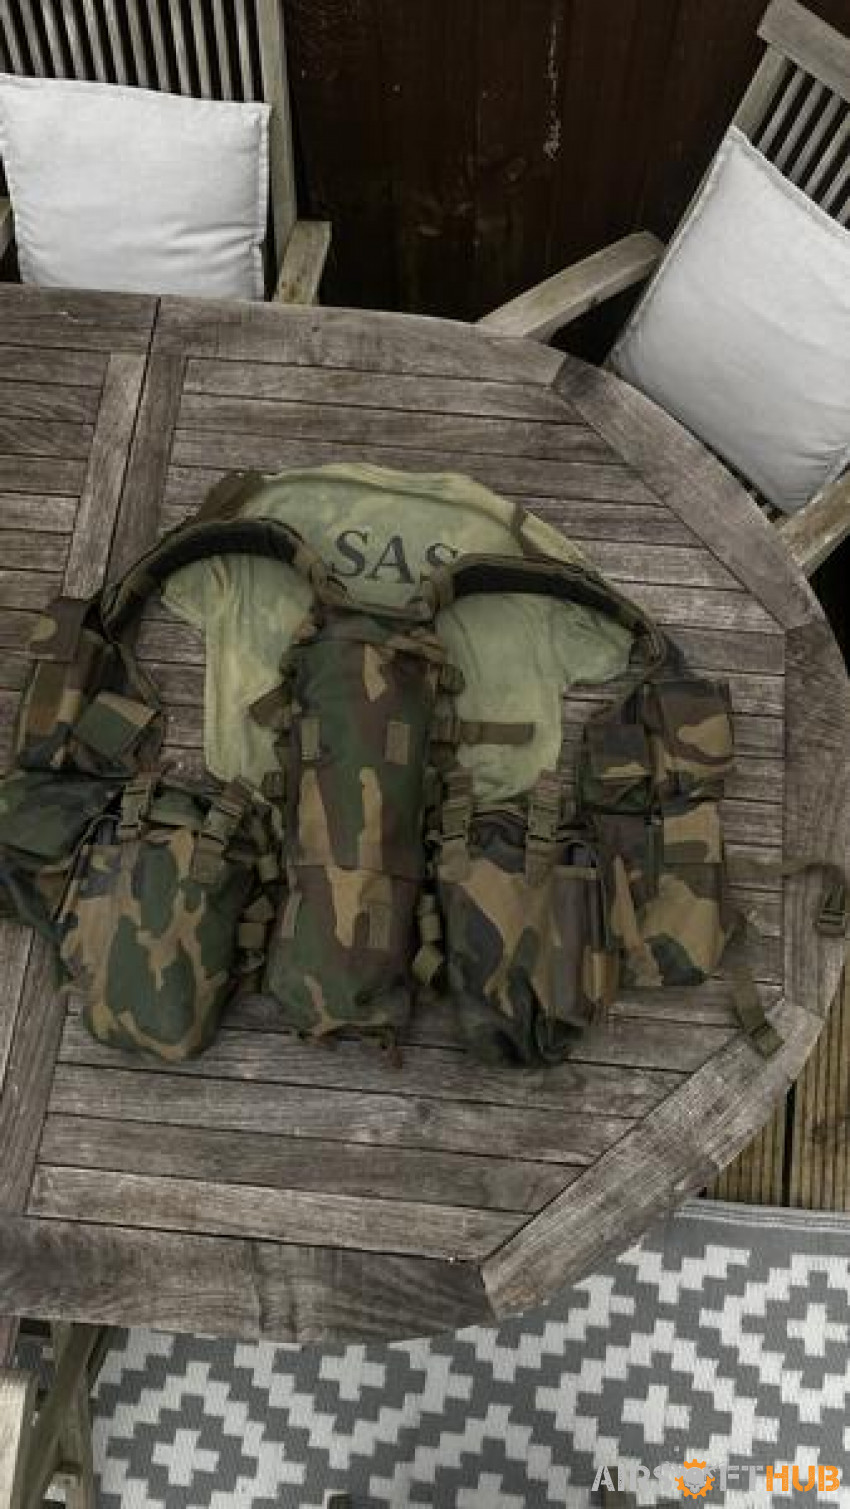 80s/90s style SAS kit - Used airsoft equipment